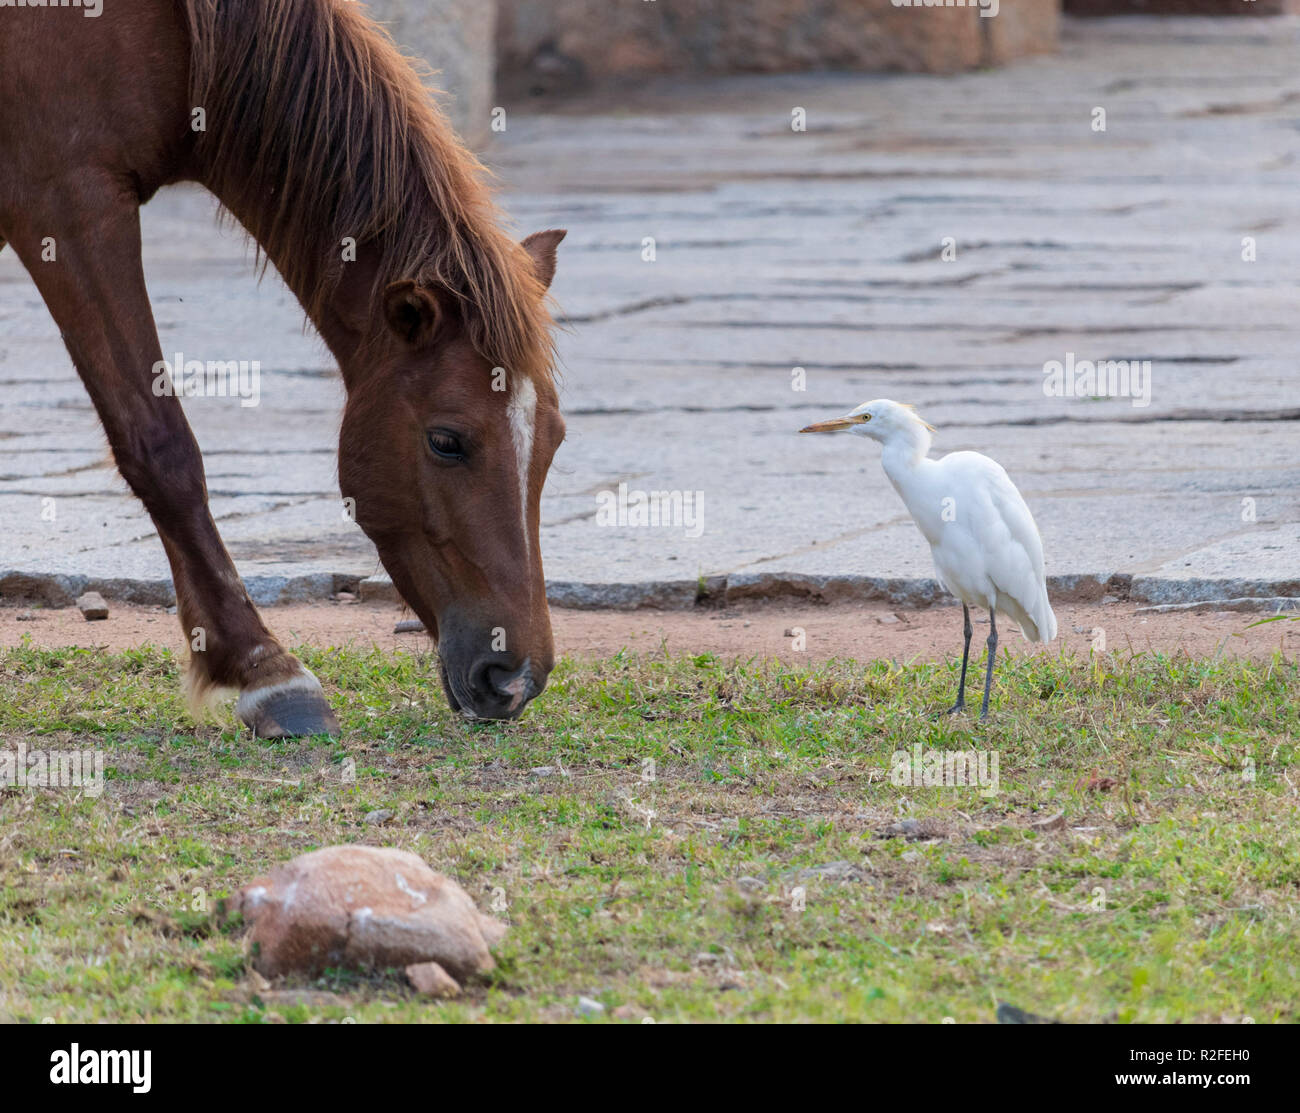 Horse and a bird roaming in a field Stock Photo